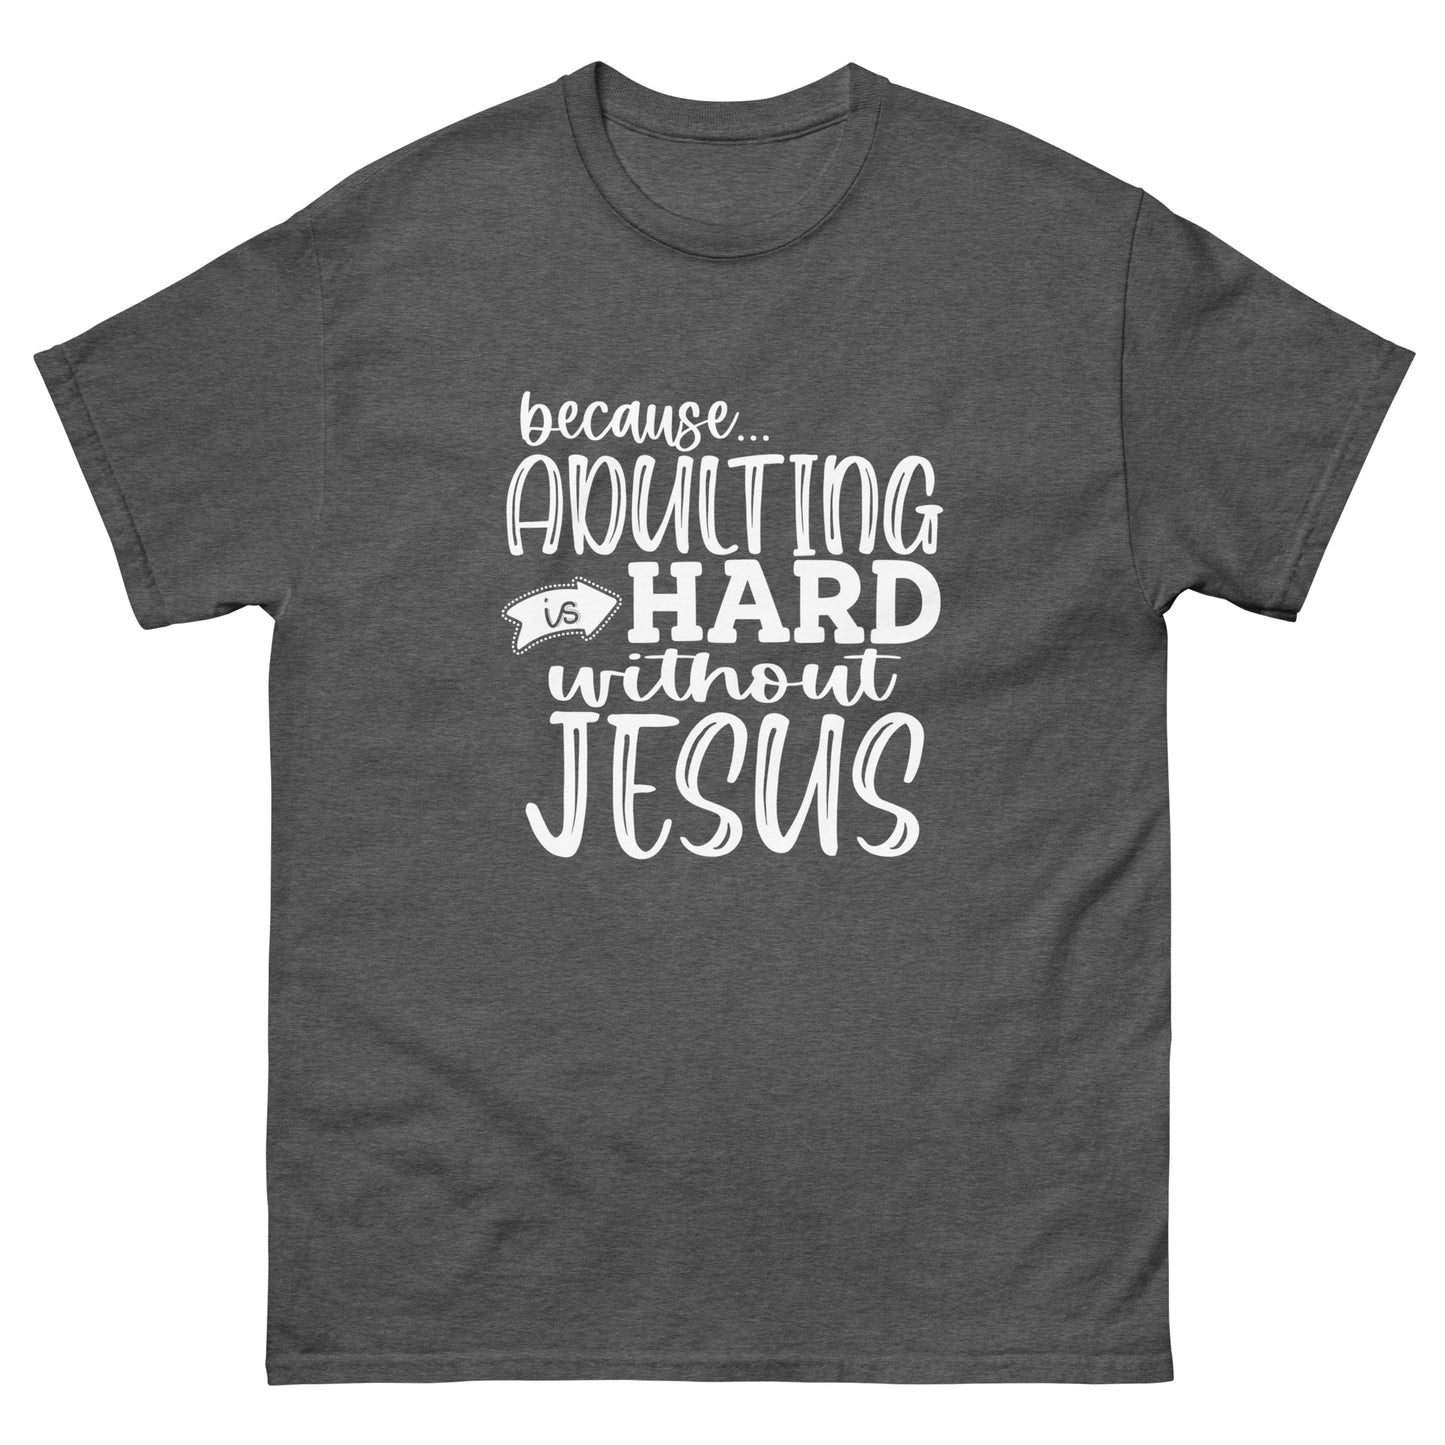 Adulting is hard without Jesus - classic tee